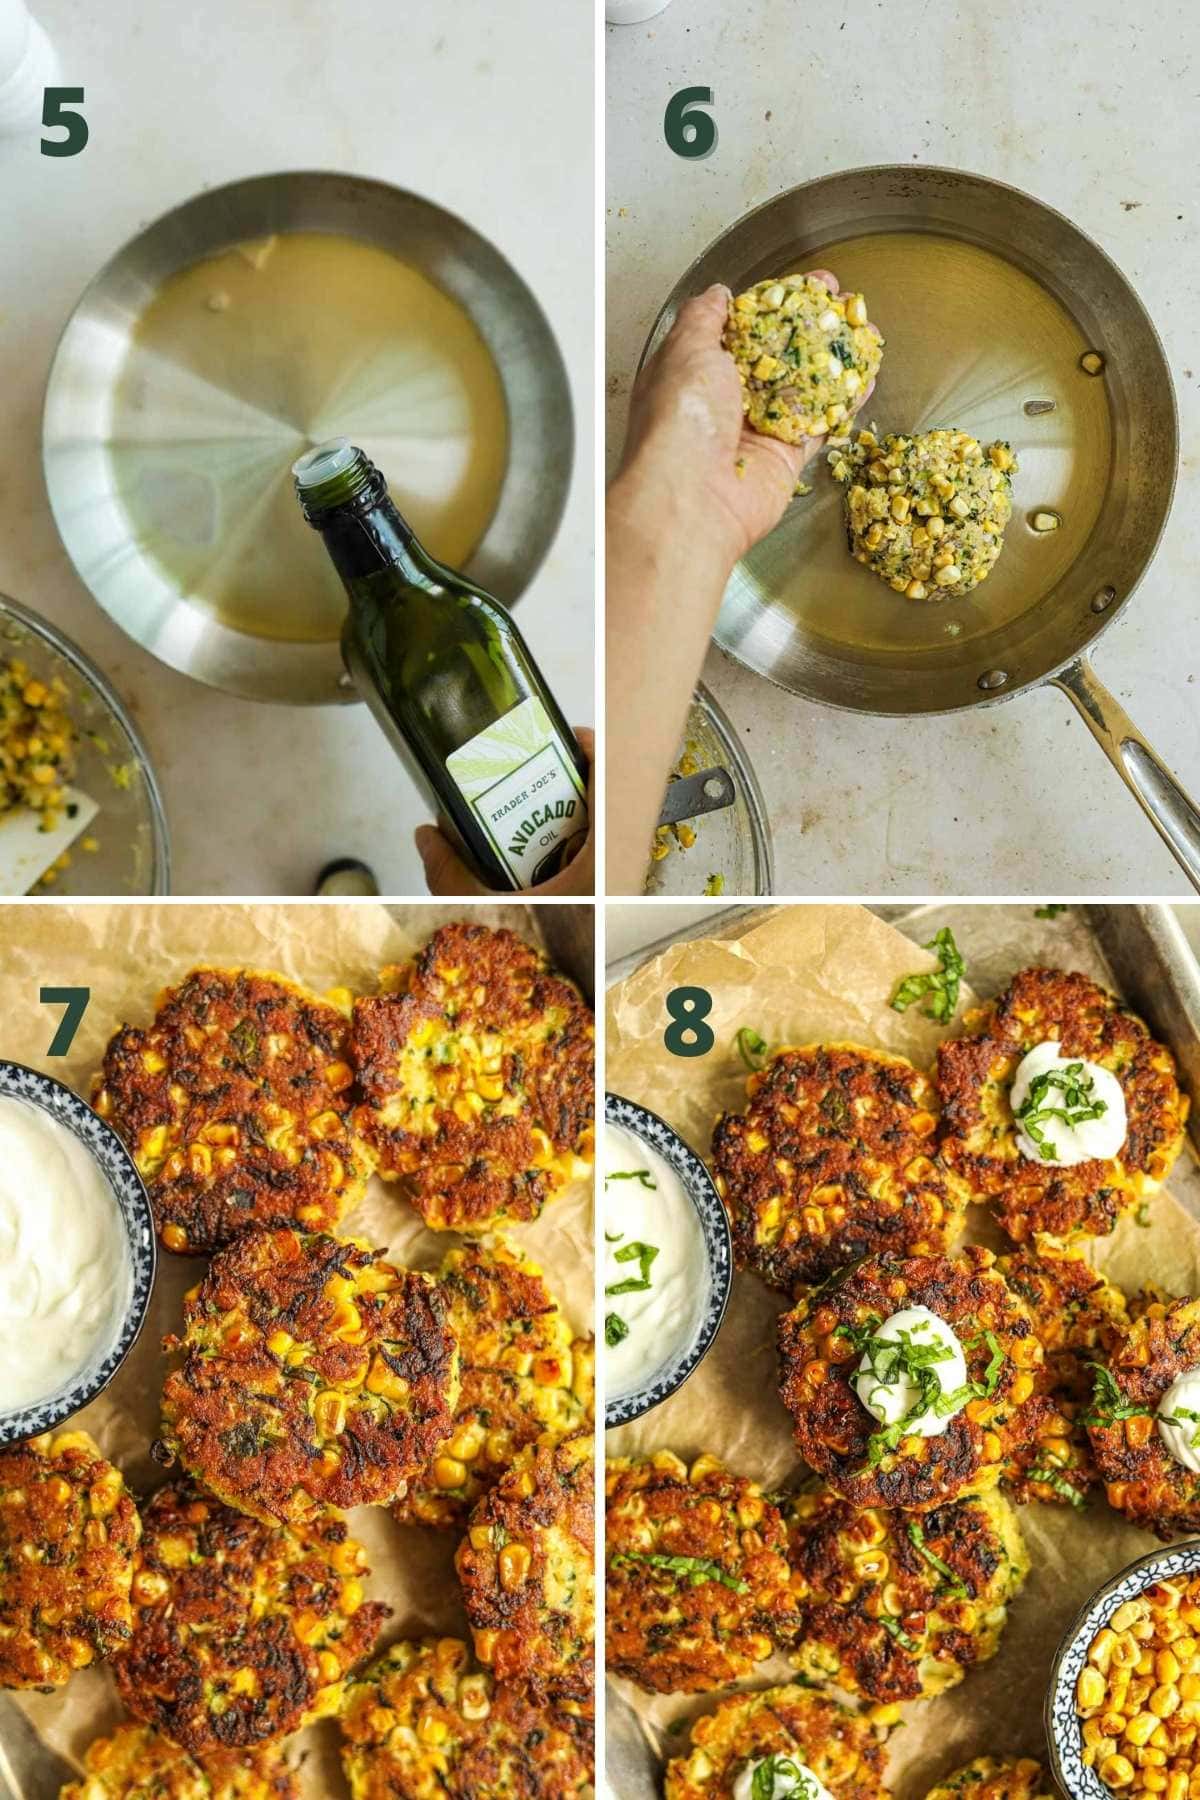 Steps to make zucchini and corn fritters, including heating the oil in a pan, frying the fritters, blotting the oil, and serving with greek yogurt and basil.